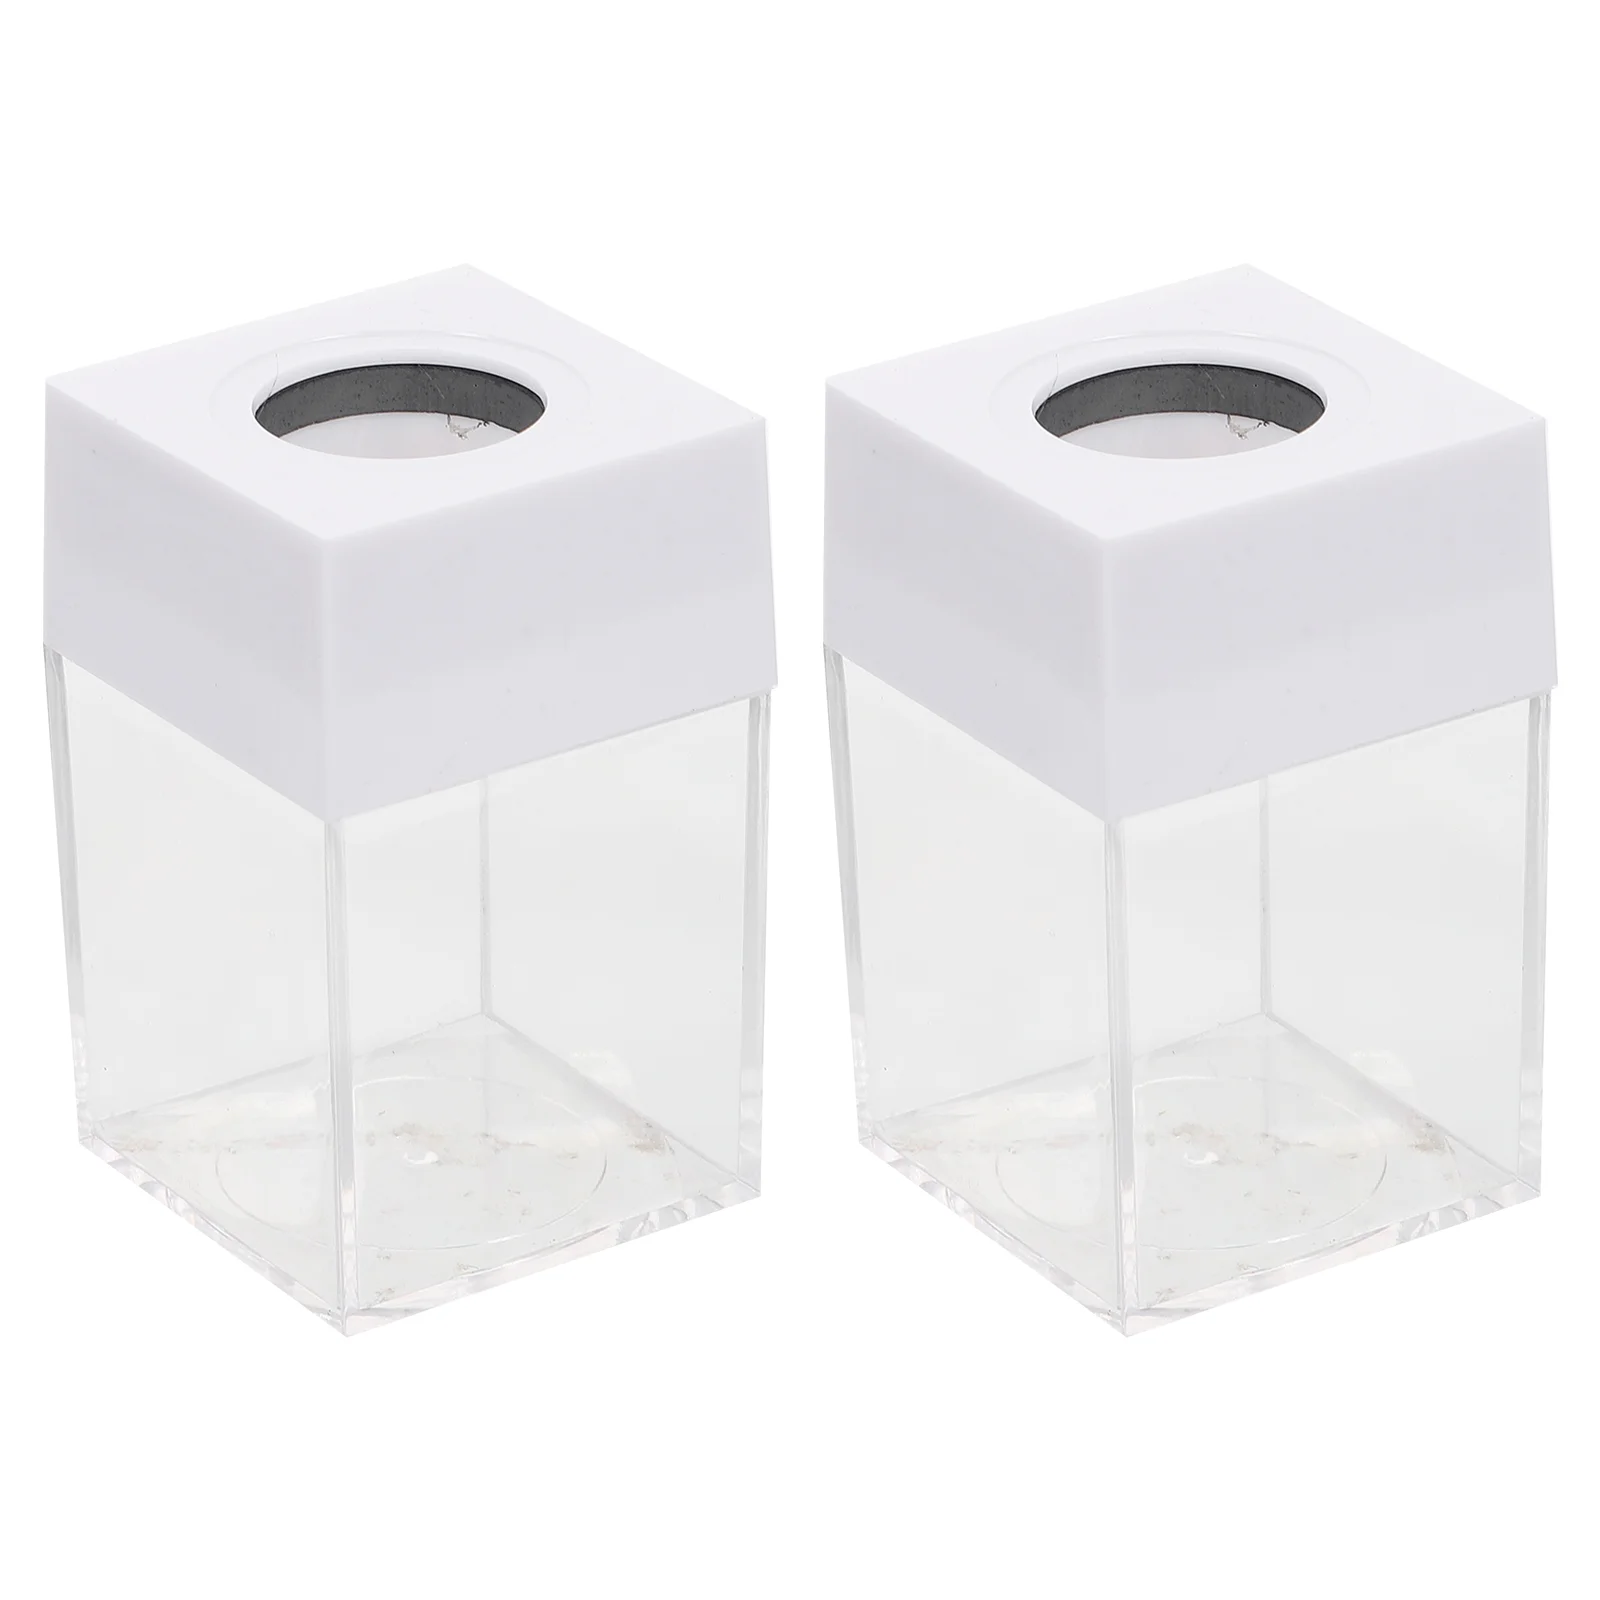 

2 Pcs Staples Paper Clip Storage Bucket Paperclip Holders Organizers Binder Containers White Student Stationery